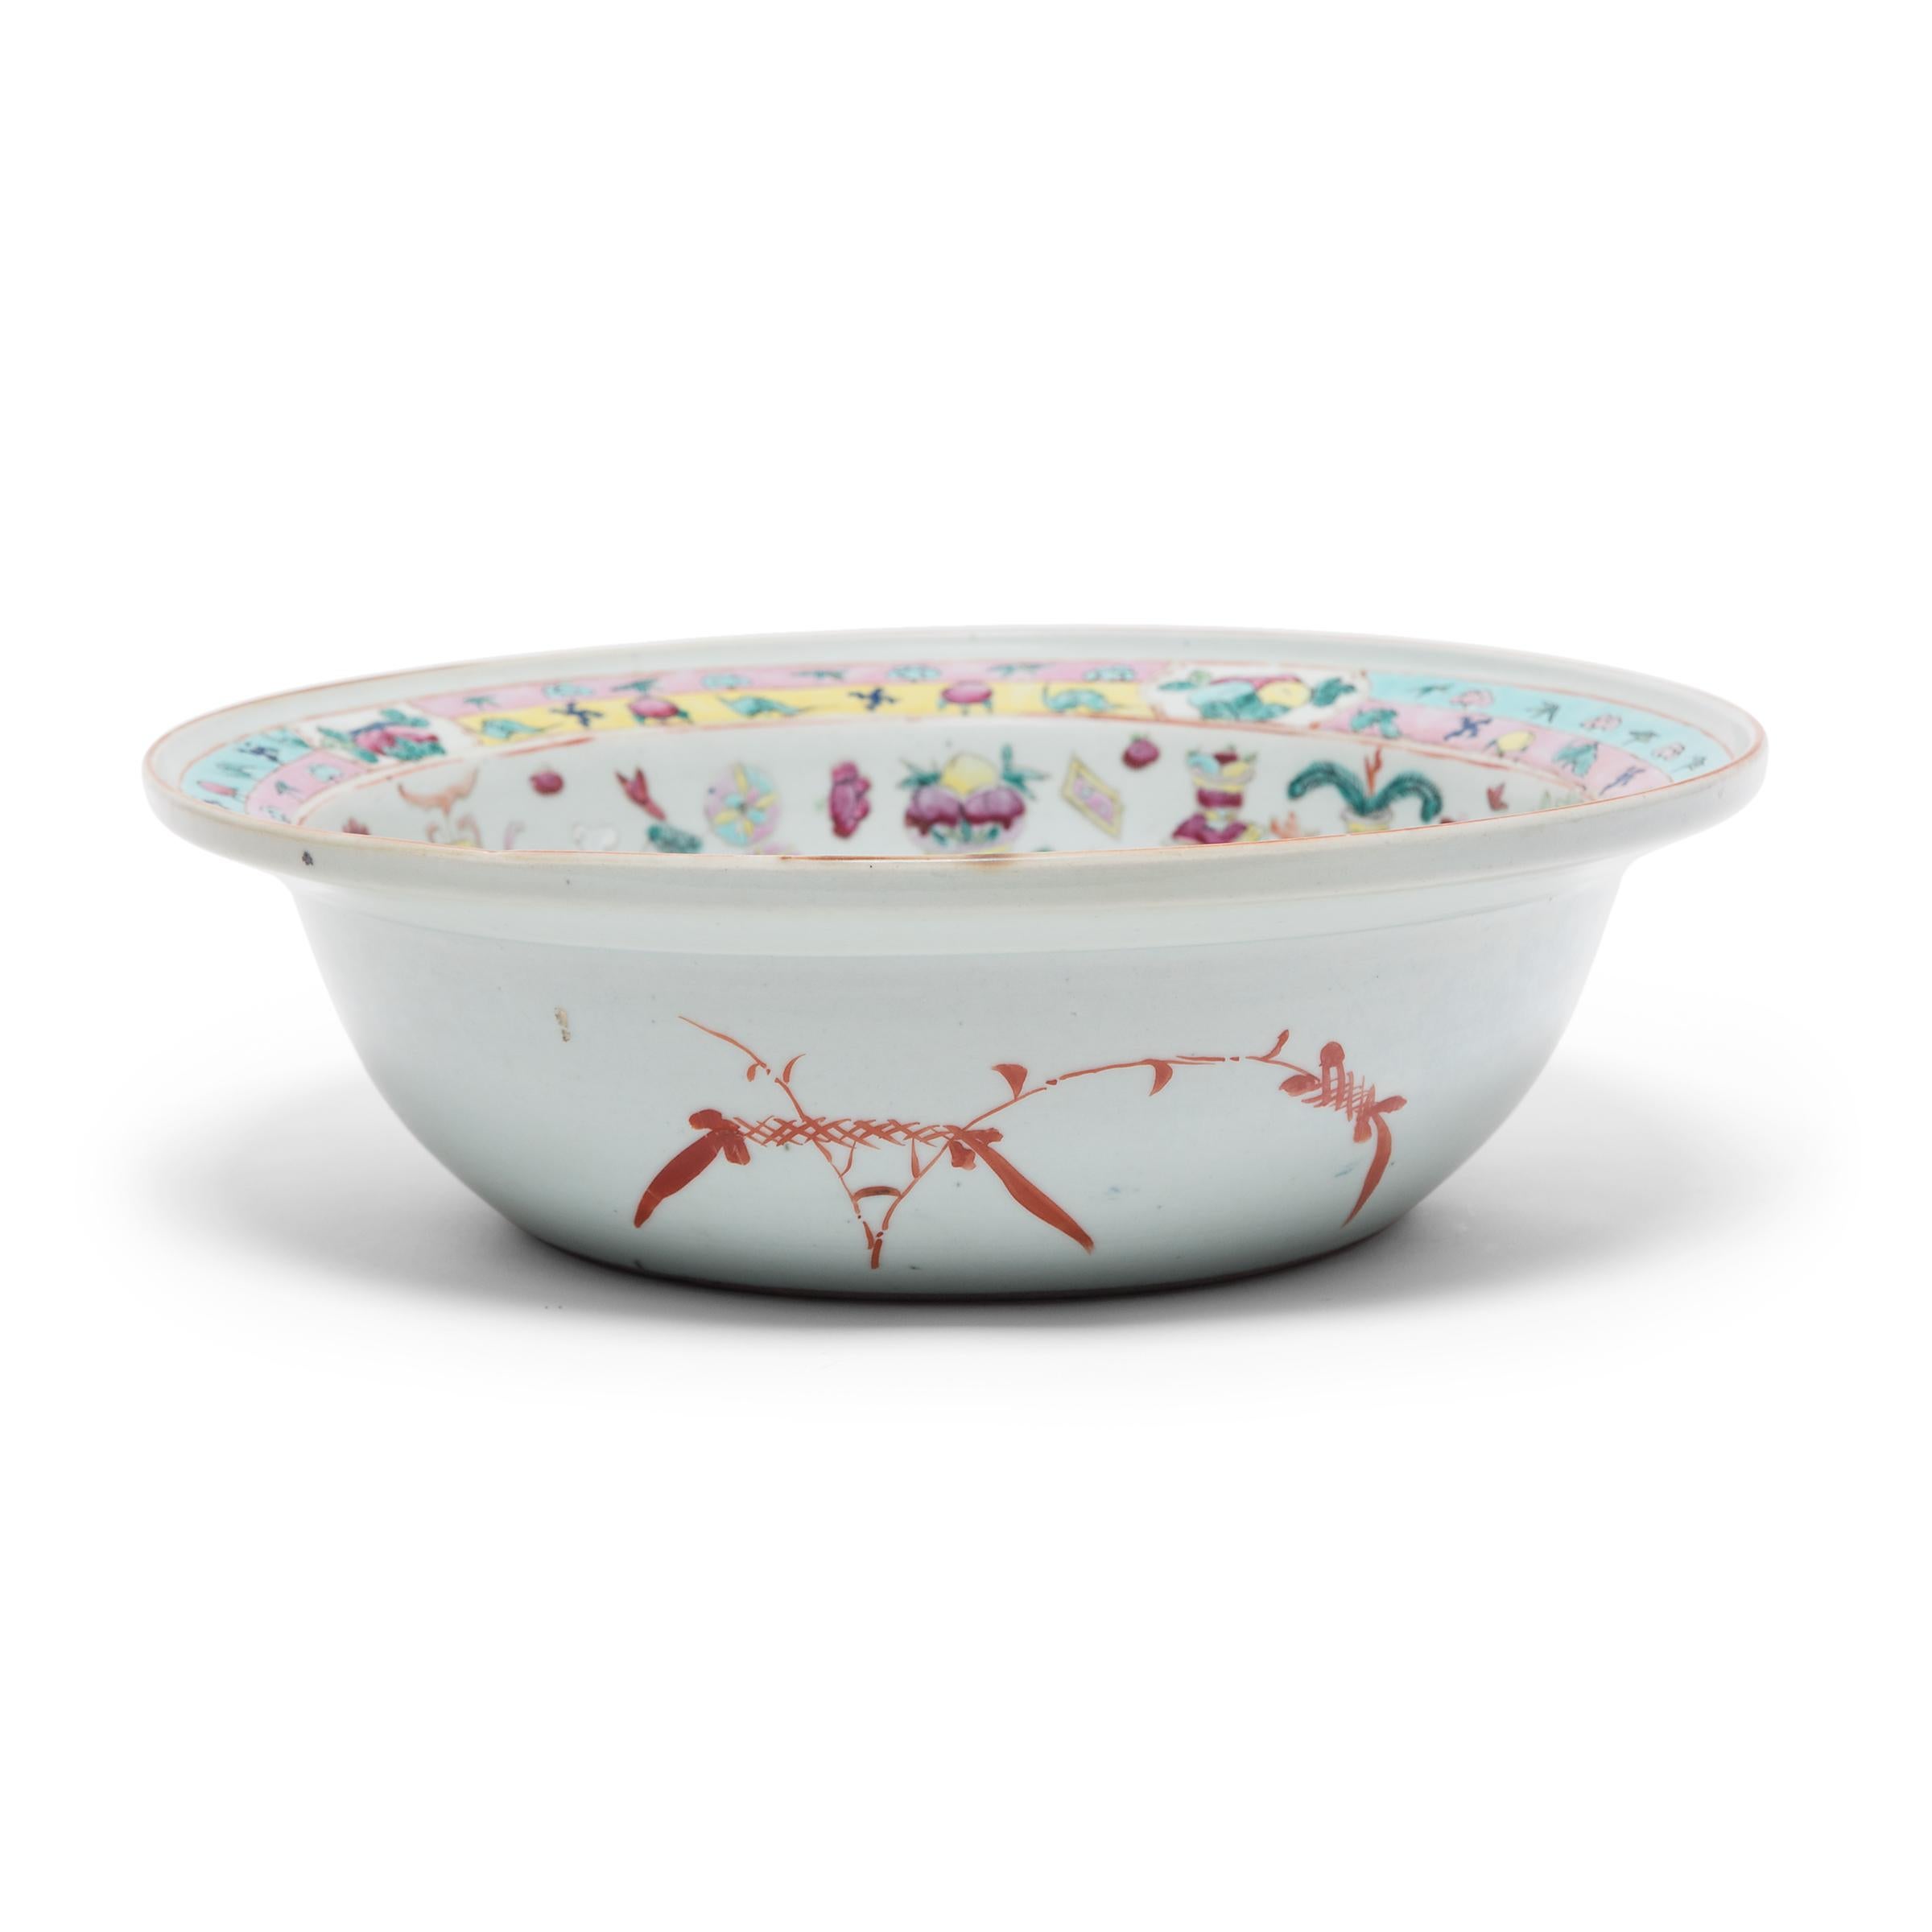 Qing Chinese Famille Rose Bowl with Scholars' Objects, c. 1850 For Sale